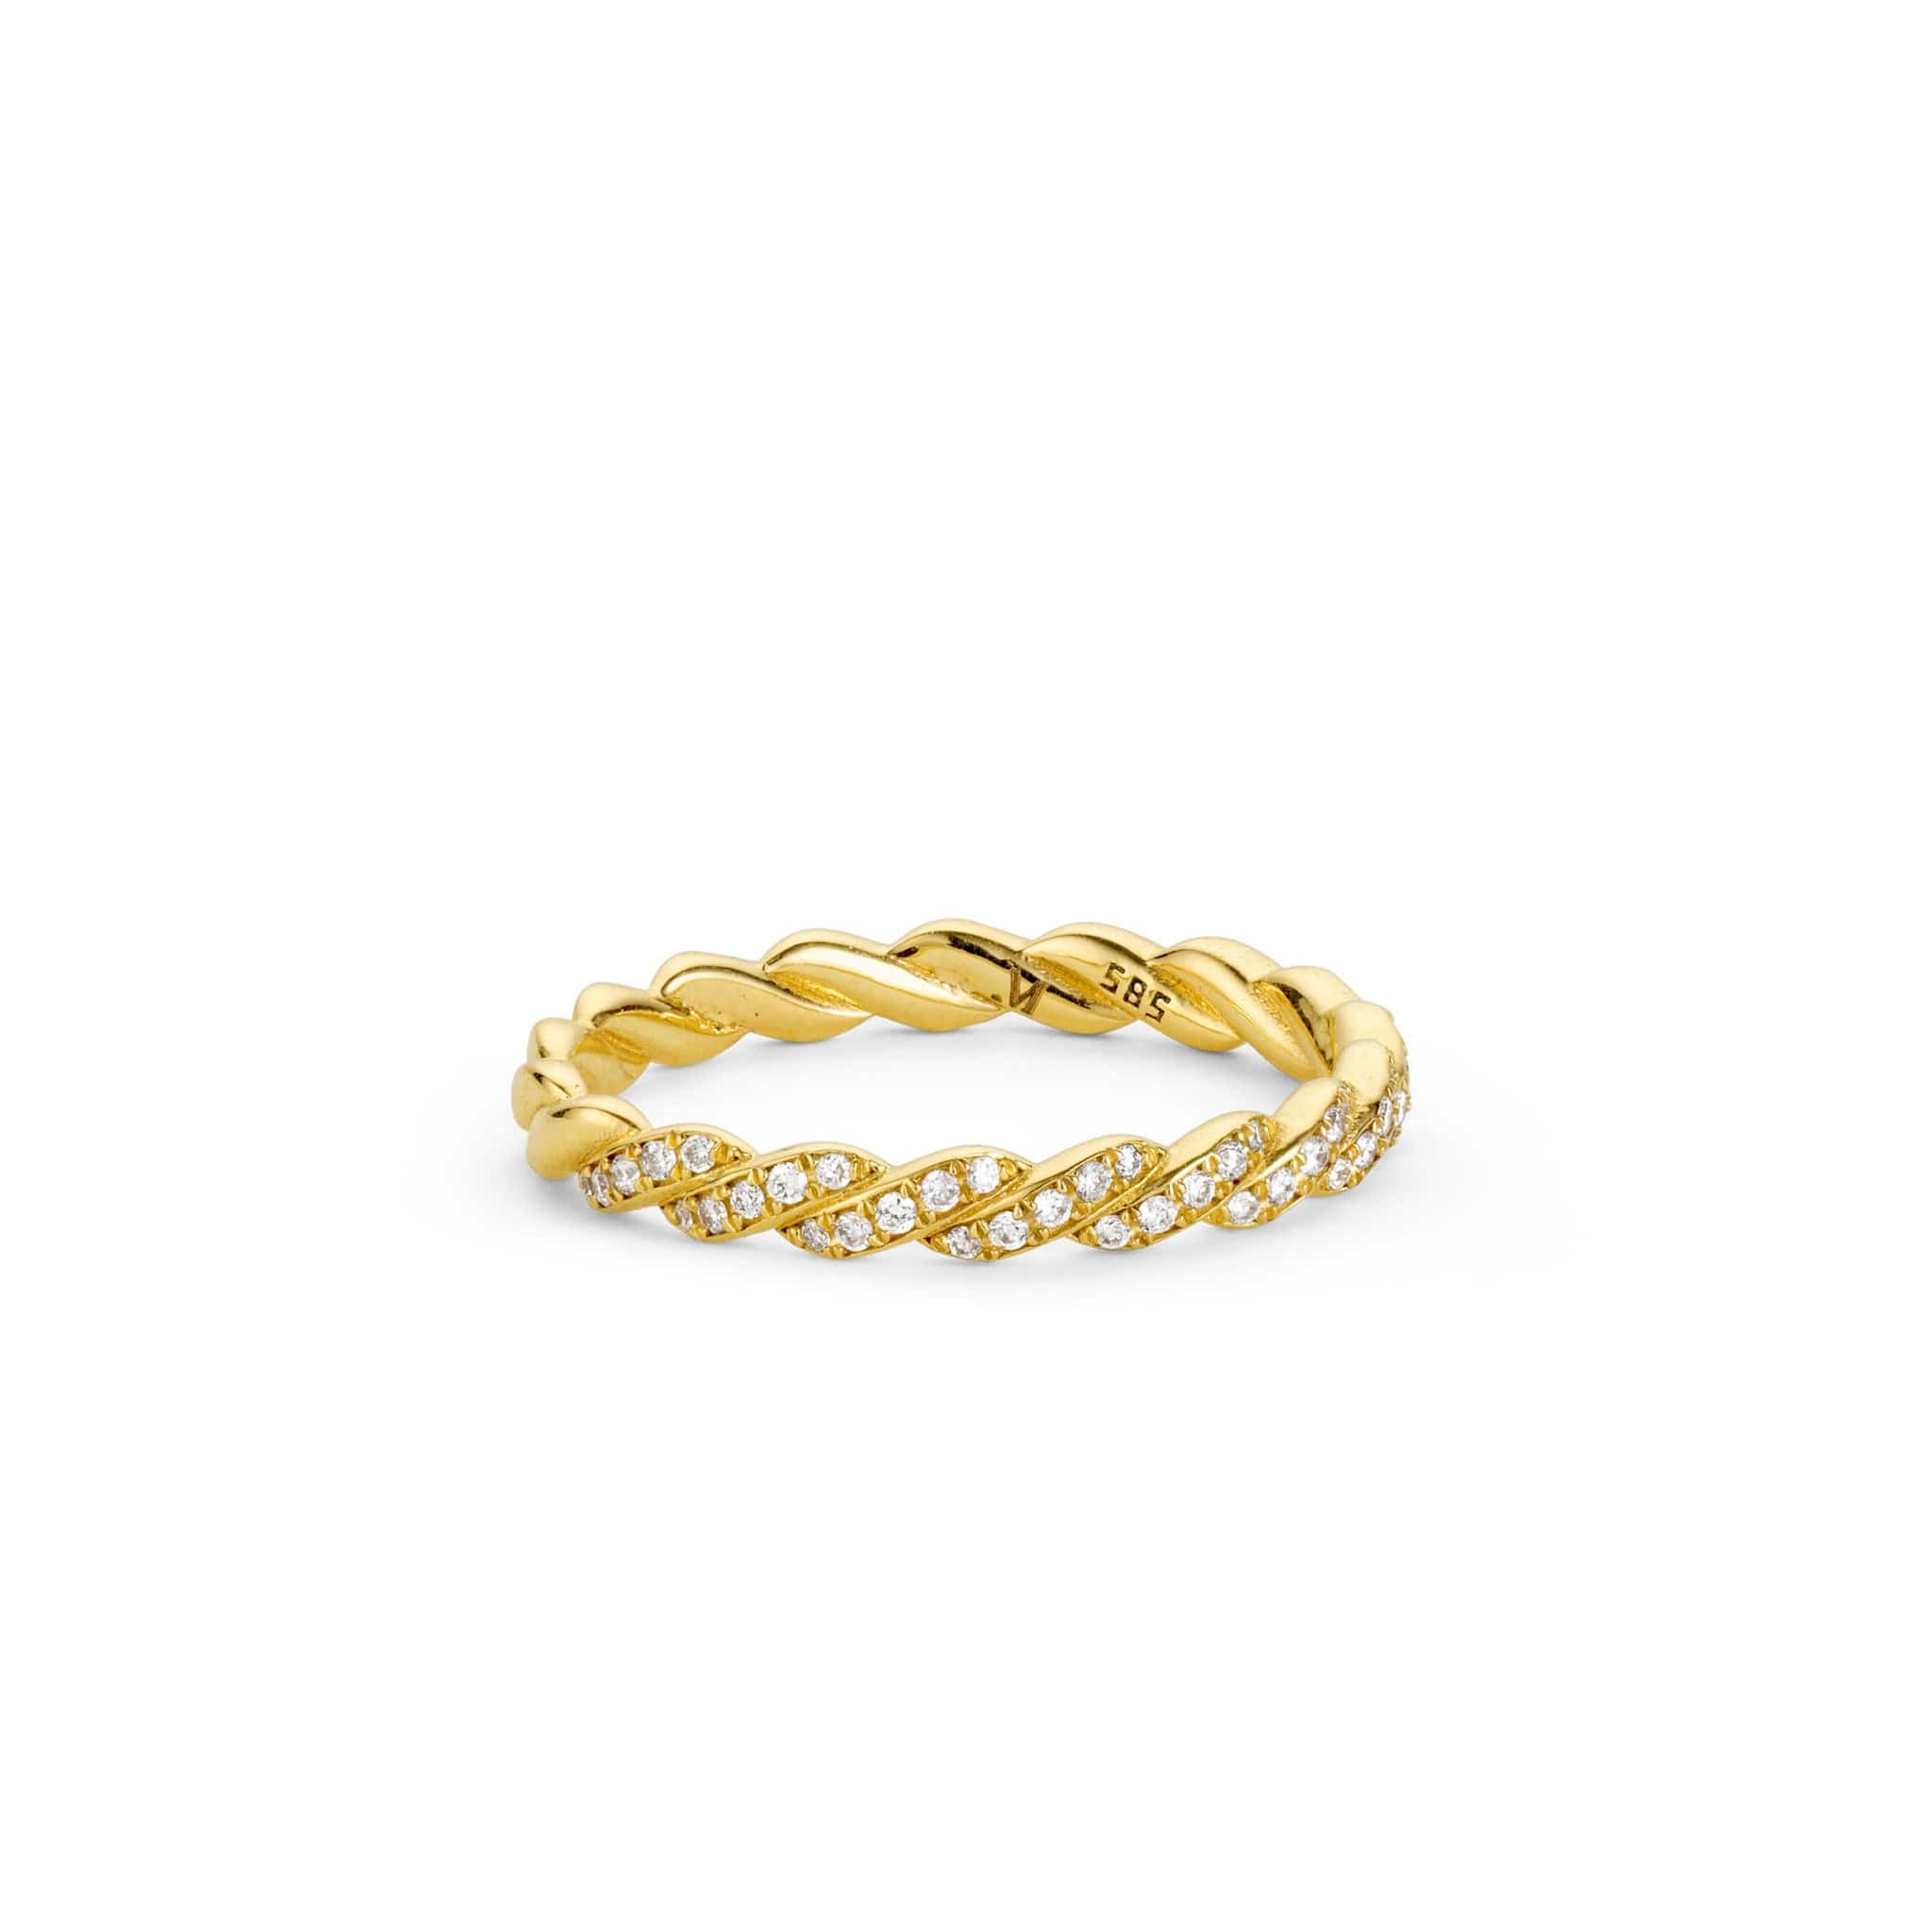 Side view of a 14k yellow gold infinity ring with pave diamonds.